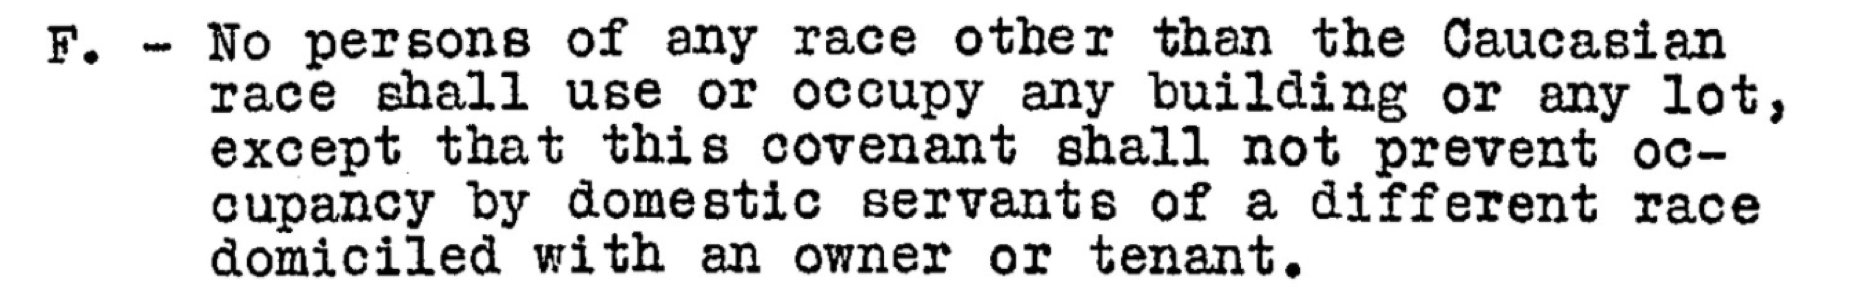 An example of a restrictive covenant: No persons of any race other than the Caucasian race shall use or occupy any building or any lot, except that this covenant shall not prevent occupancy by domestic servants domiciled with an owner or tenant.